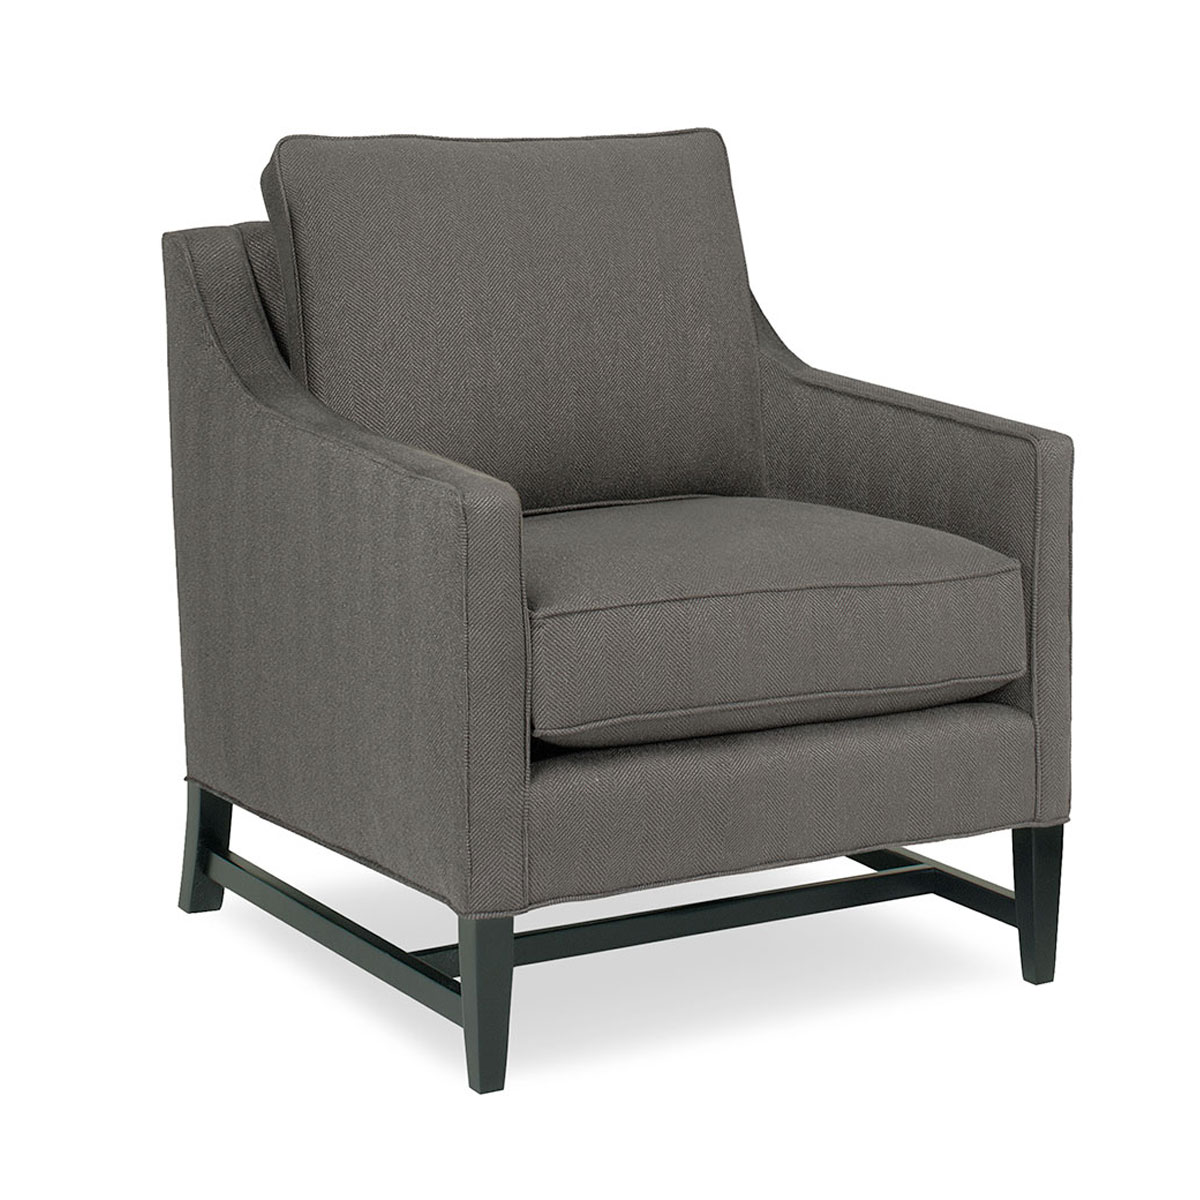 Temple Furniture 5105 Sassy Chair